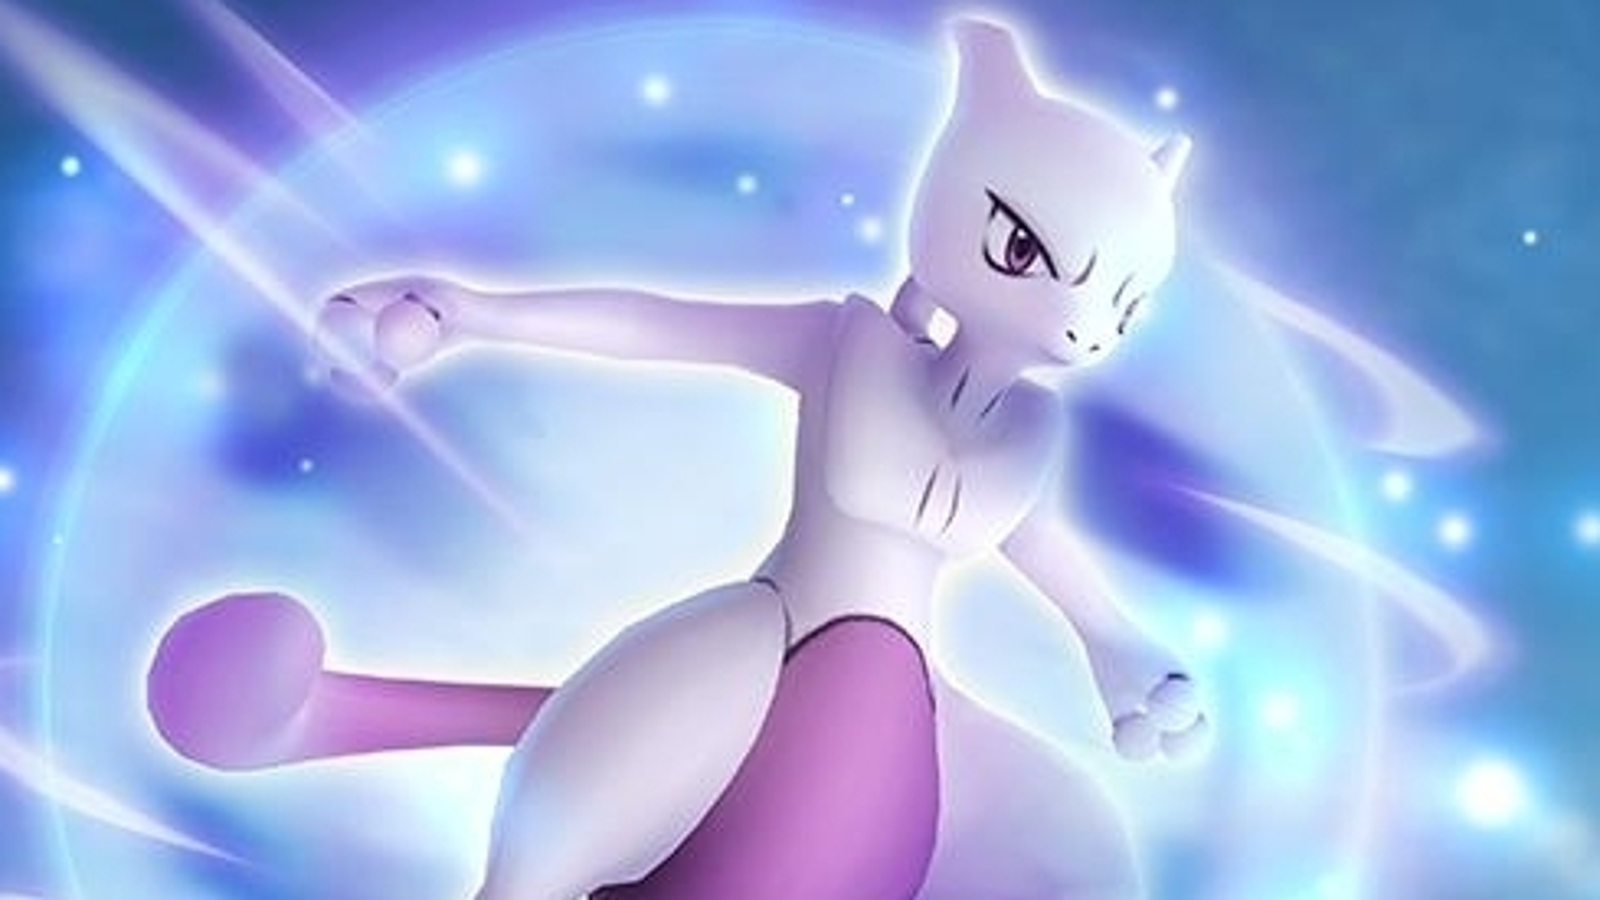 Pokémon Go Mewtwo counters, weaknesses and moveset, including Armoured Mewtwo  counters, explained